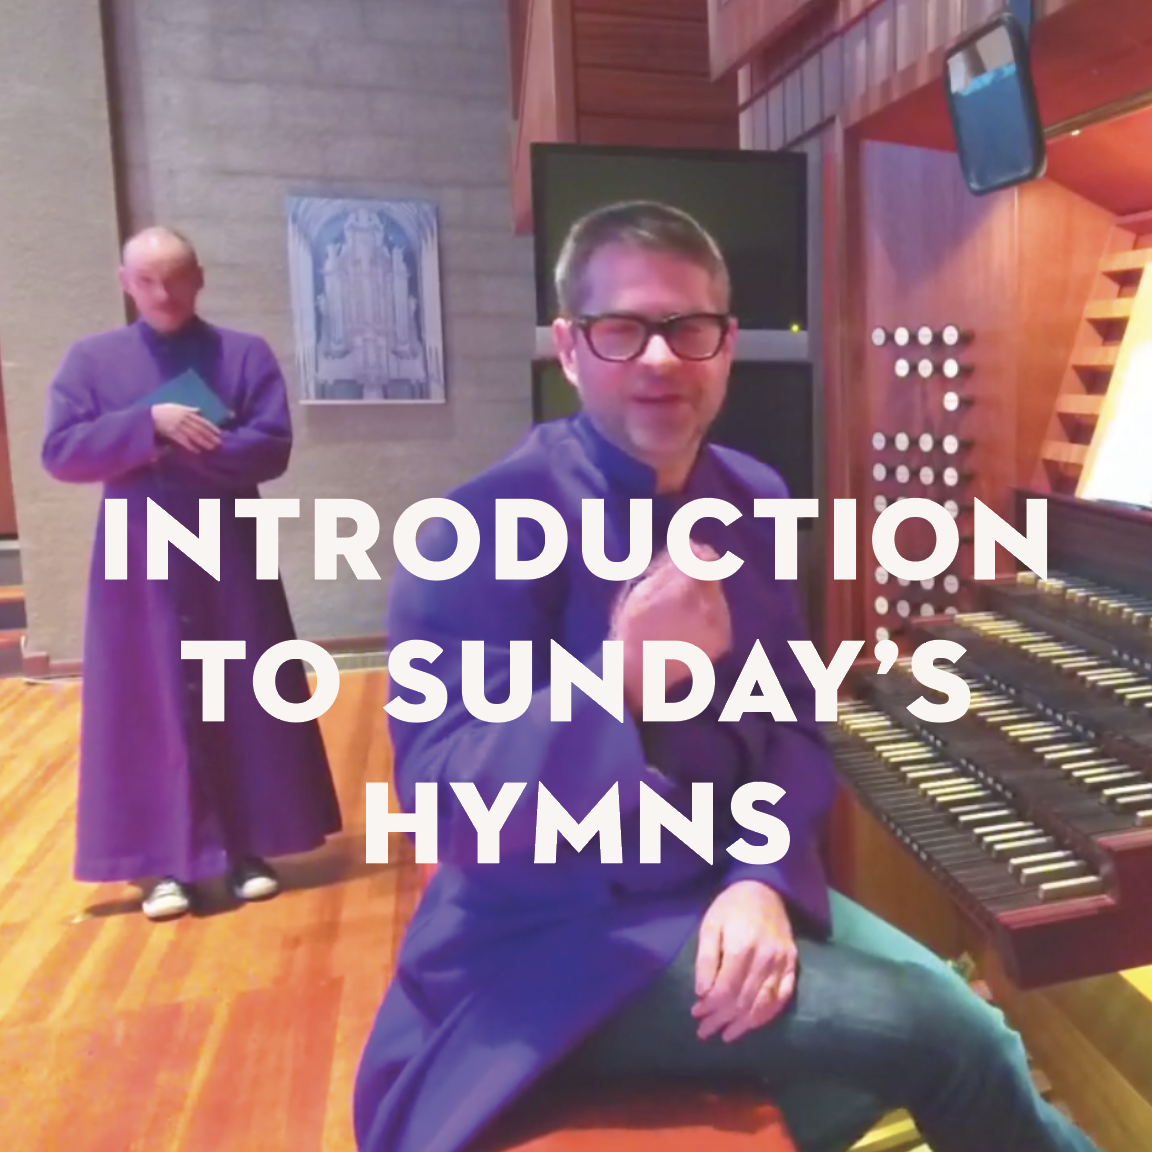 Introduction to Sunday’s Hymns: March 21, 2021